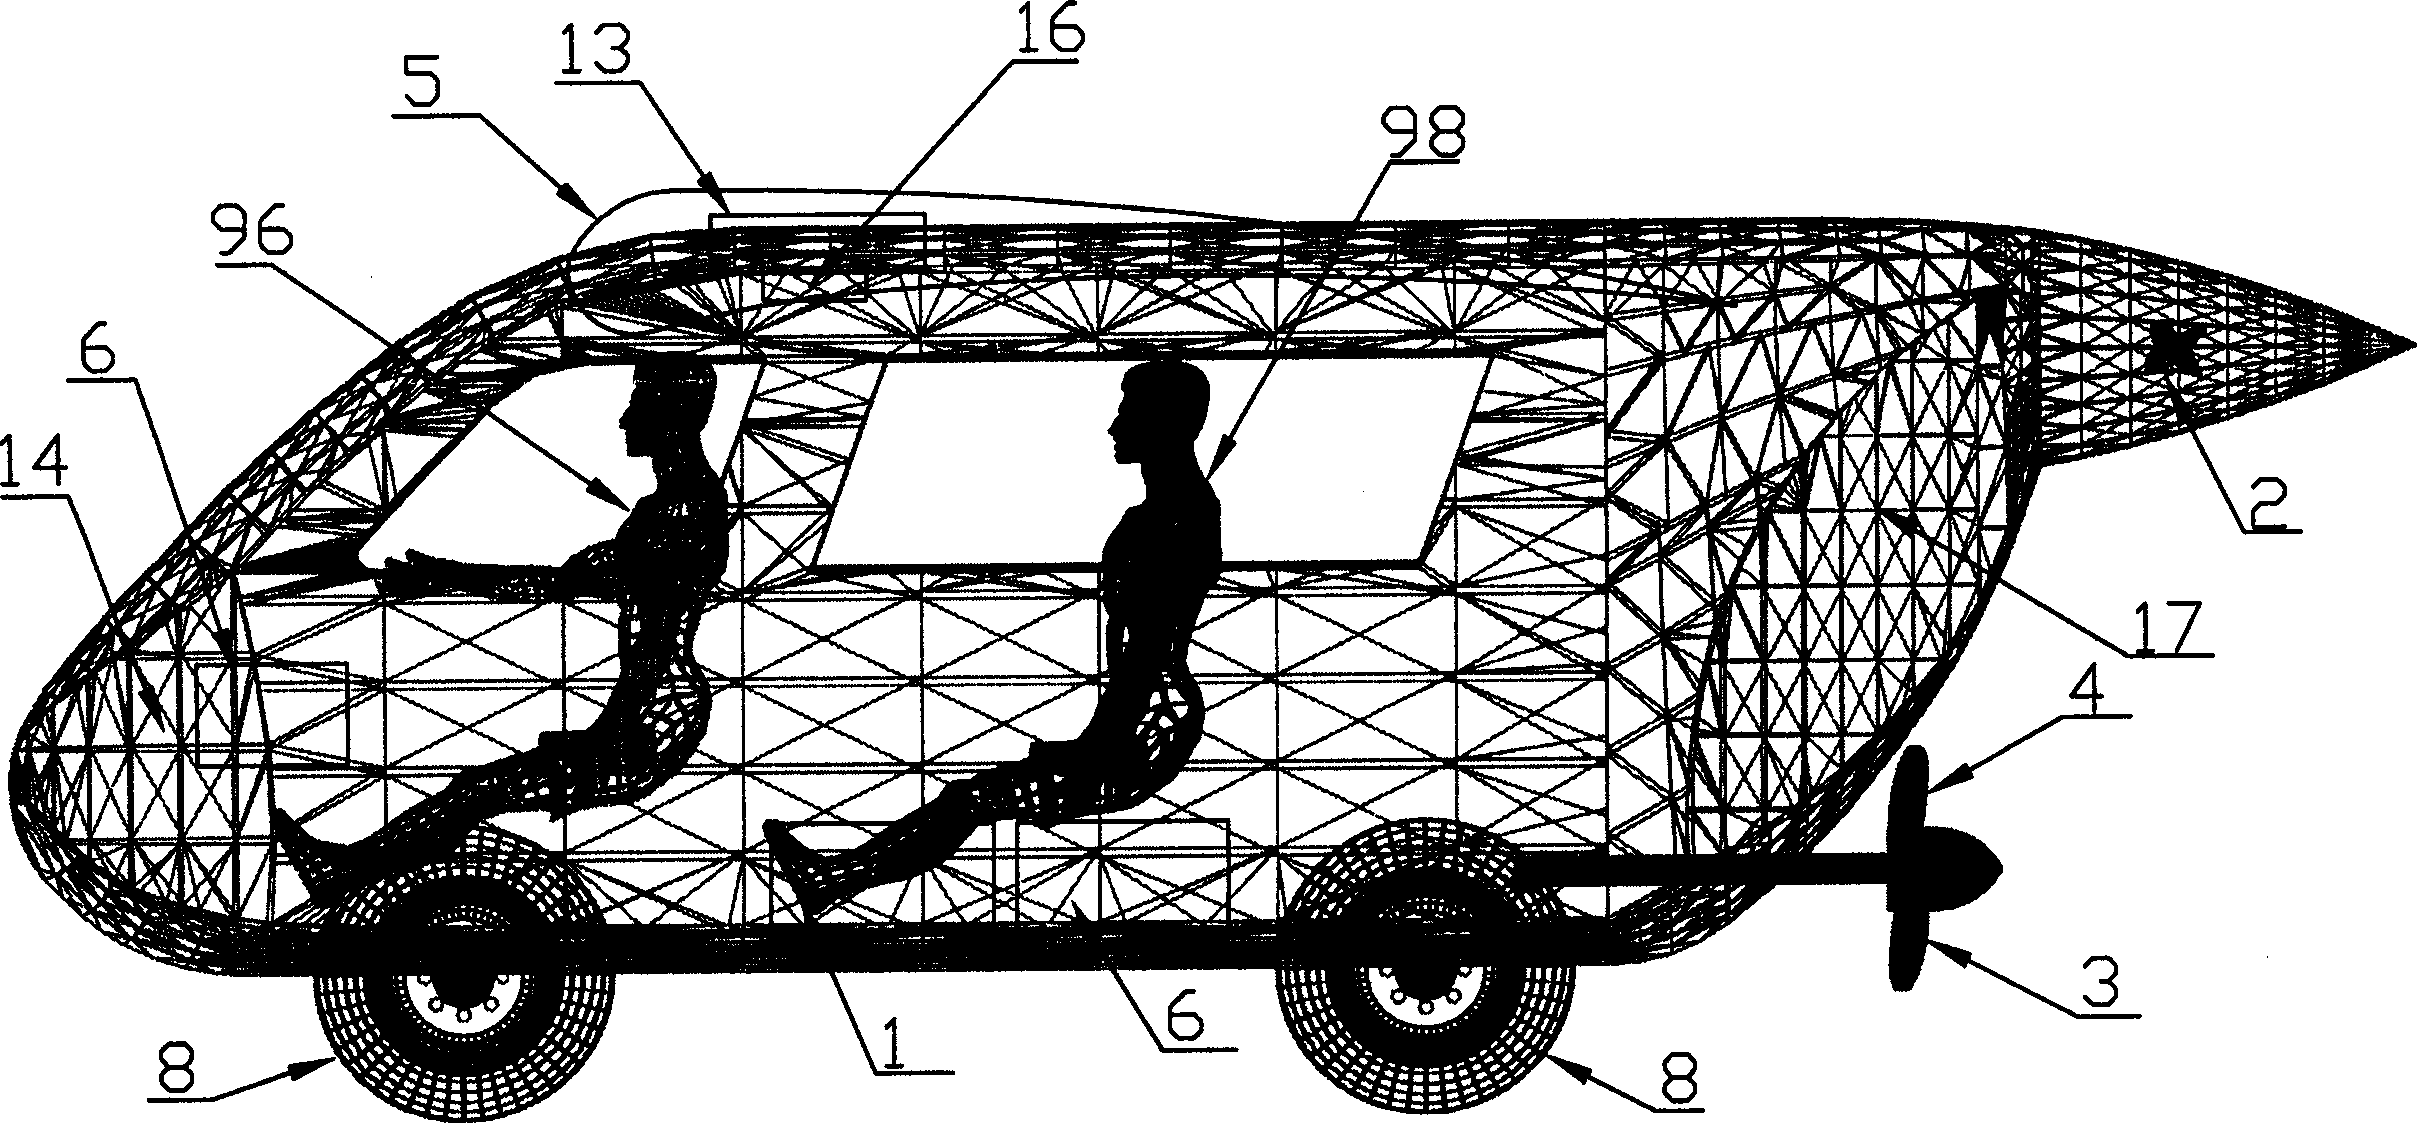 Flapping-wing flying water automobile